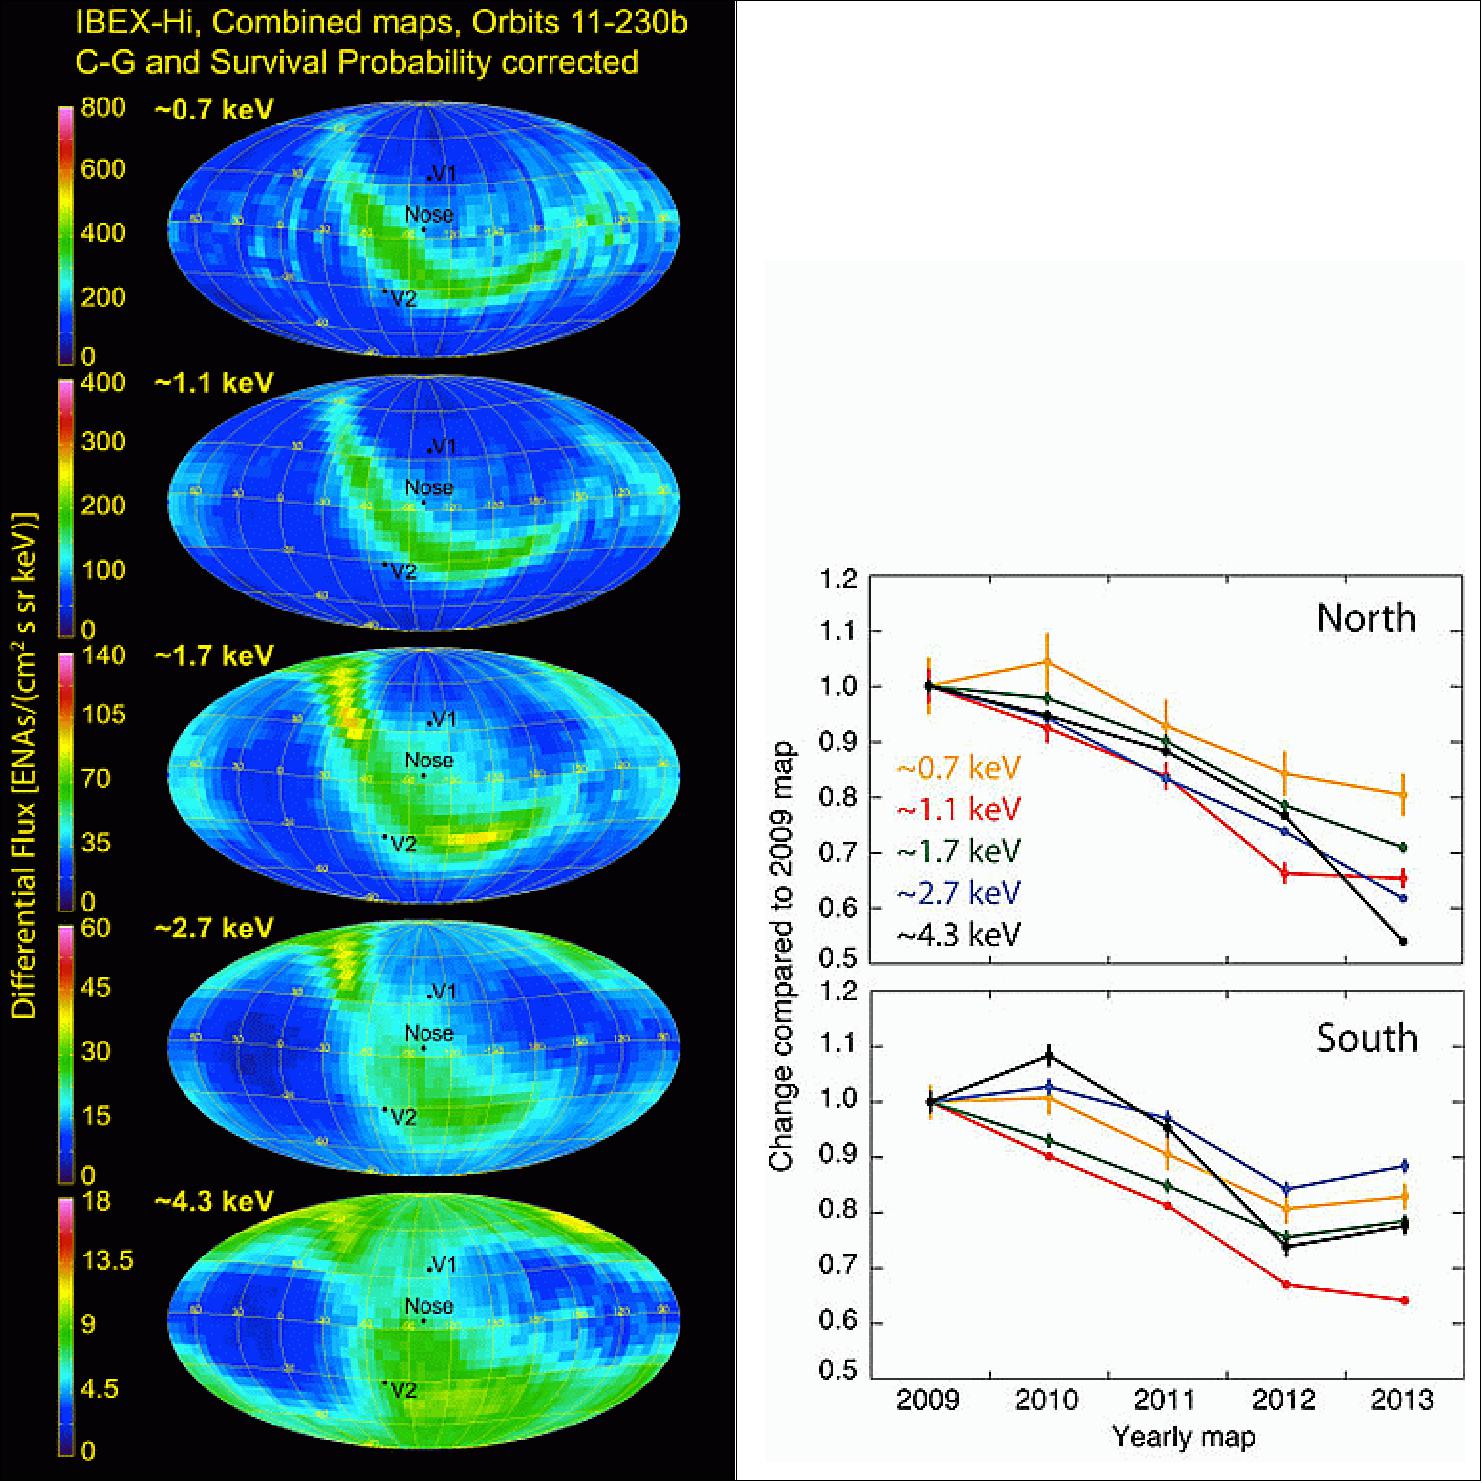 Figure 26: This image highlights the statically combined survival probability and C-G corrected maps, indicative of ENA (Energetic Neutral Atom) fluxes in the outer heliosphere directed inward and before ionization losses (image credit: SwRI)